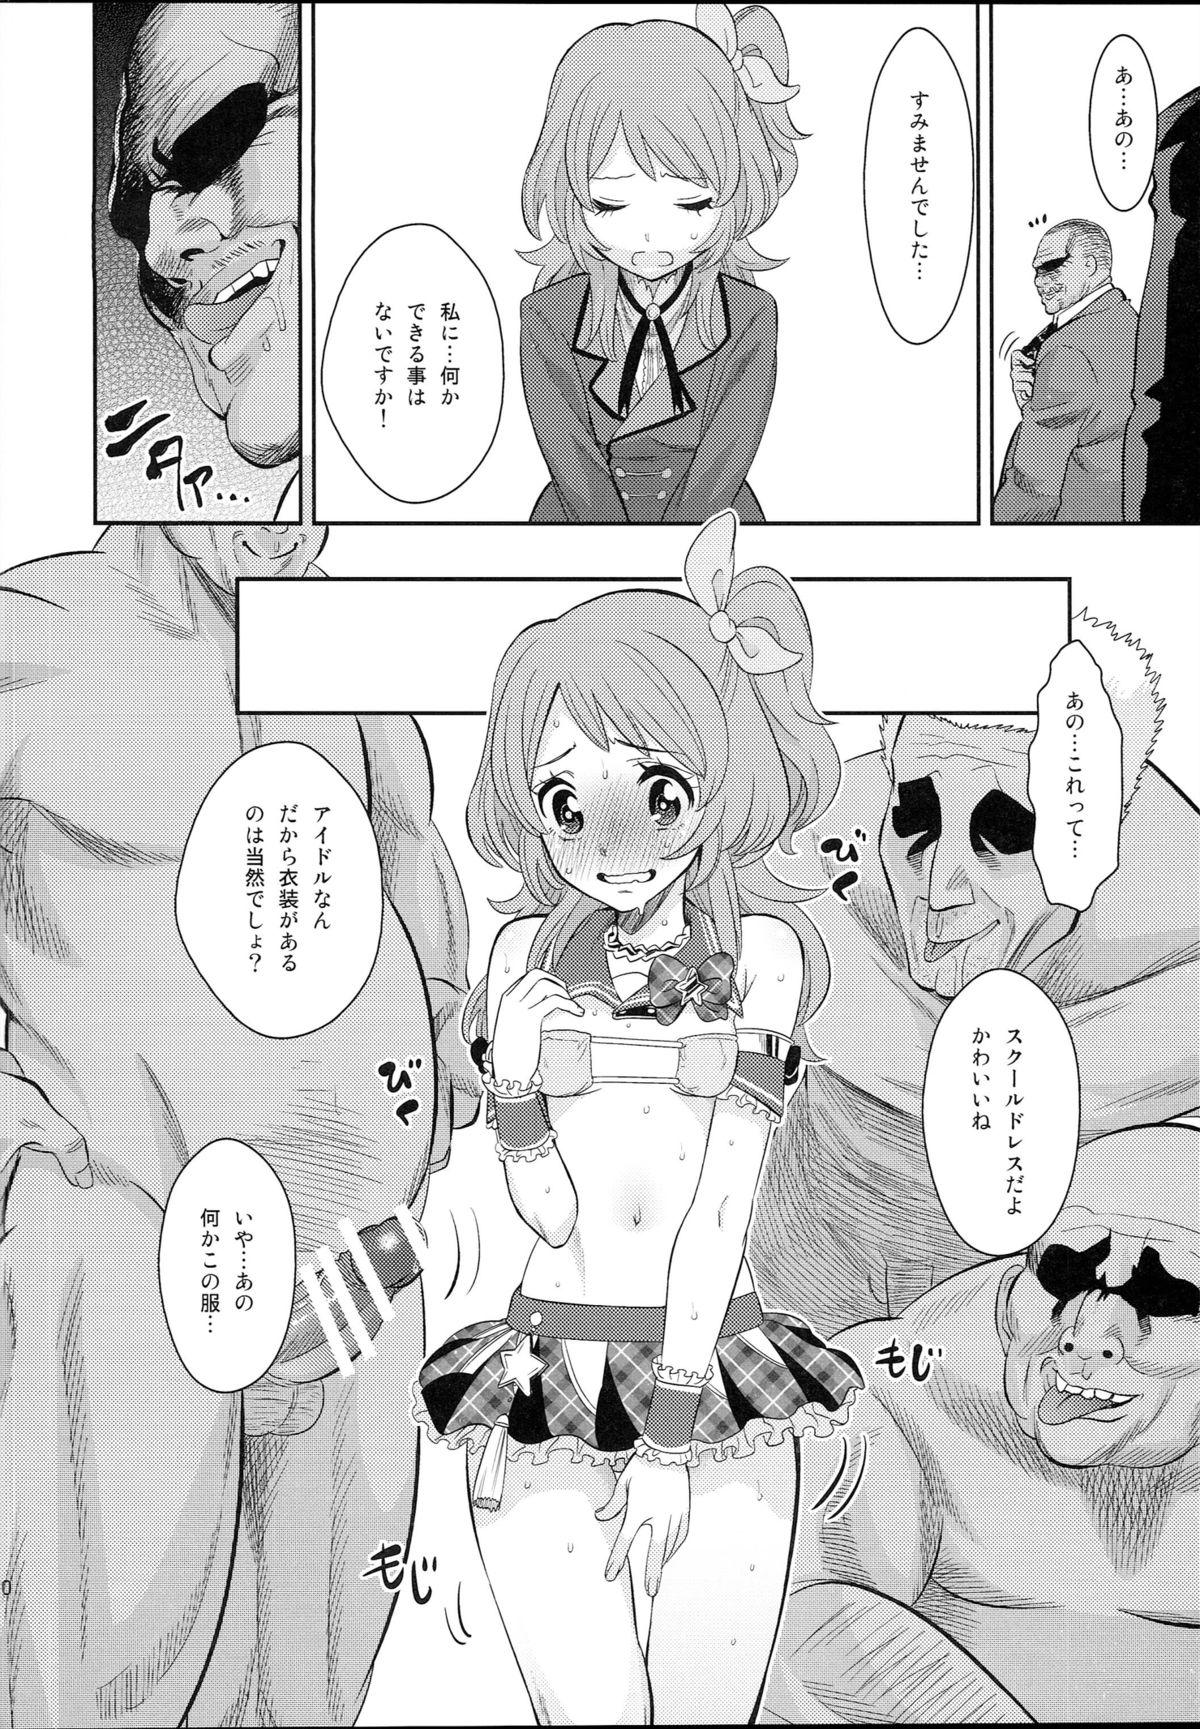 Buttplug IT WAS A good EXPERiENCE - Aikatsu Thai - Page 10